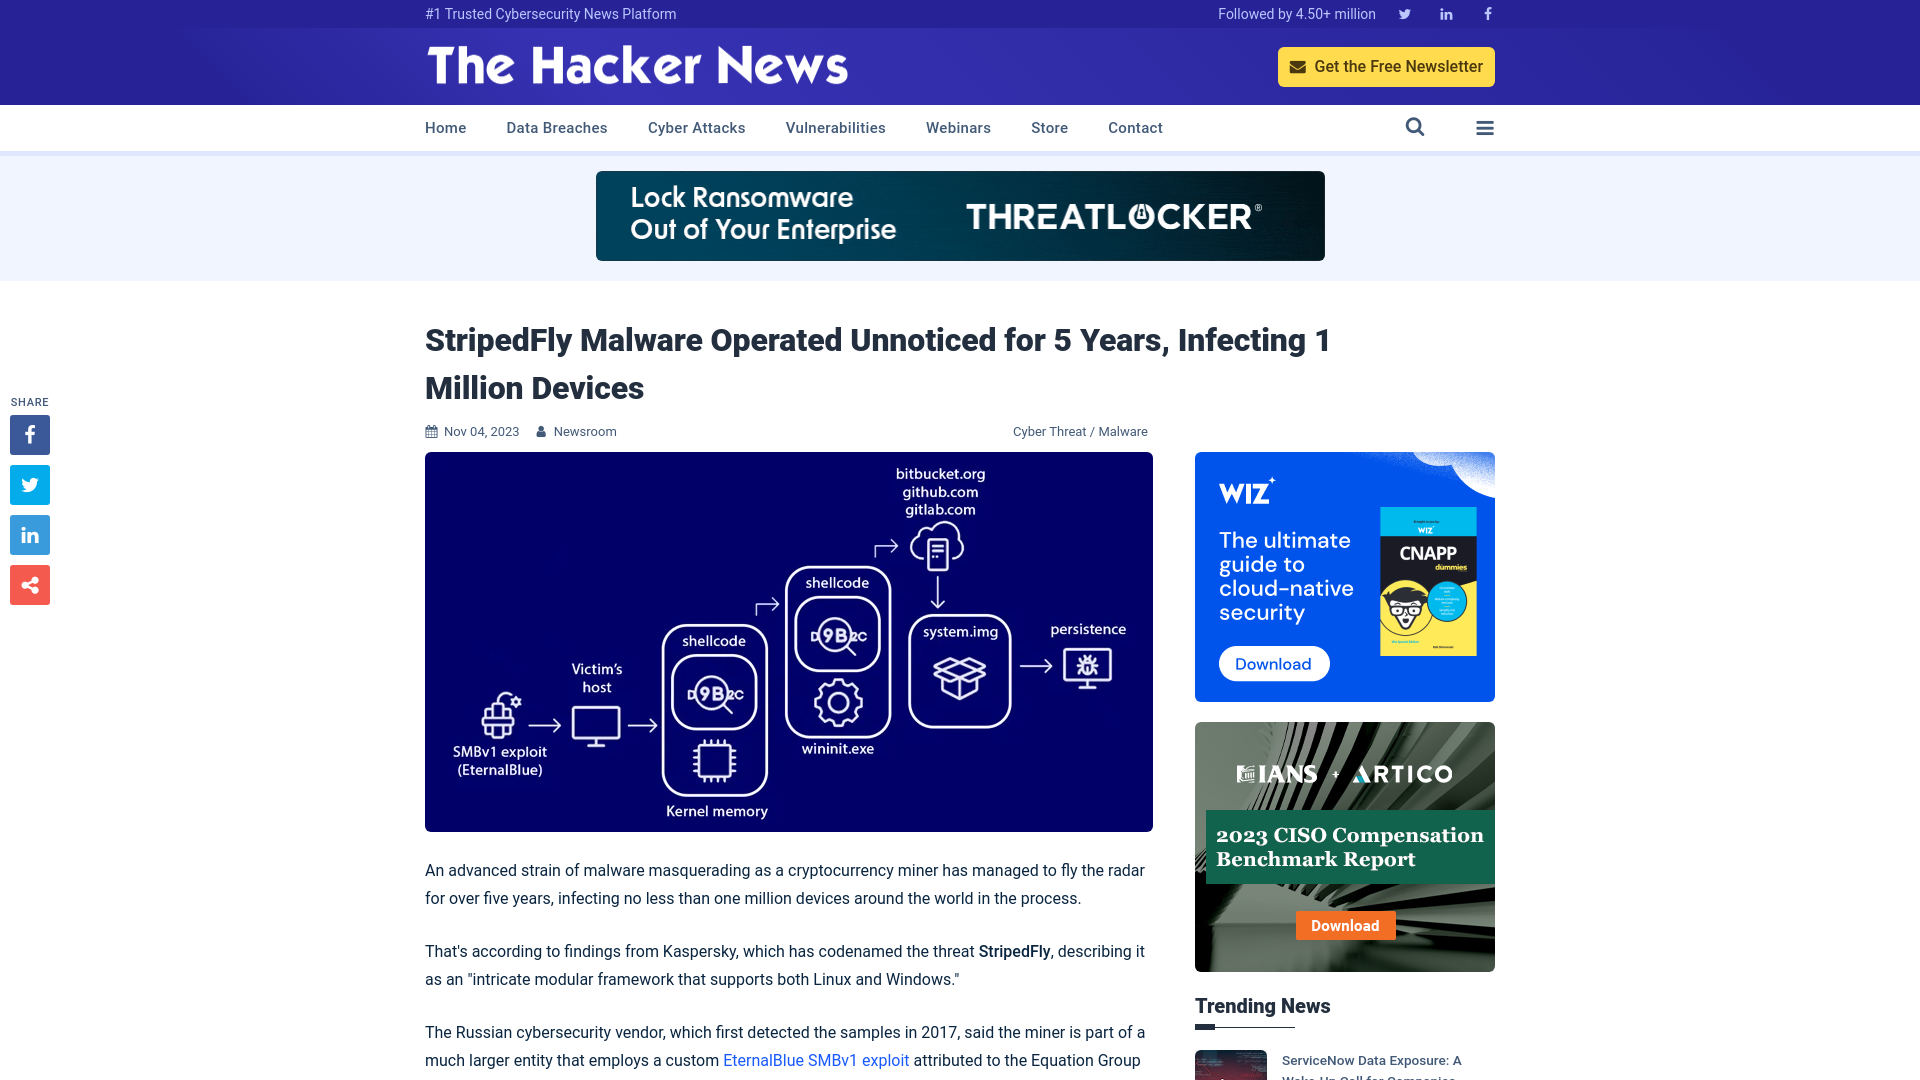 StripedFly Malware Operated Unnoticed for 5 Years, Infecting 1 Million Devices